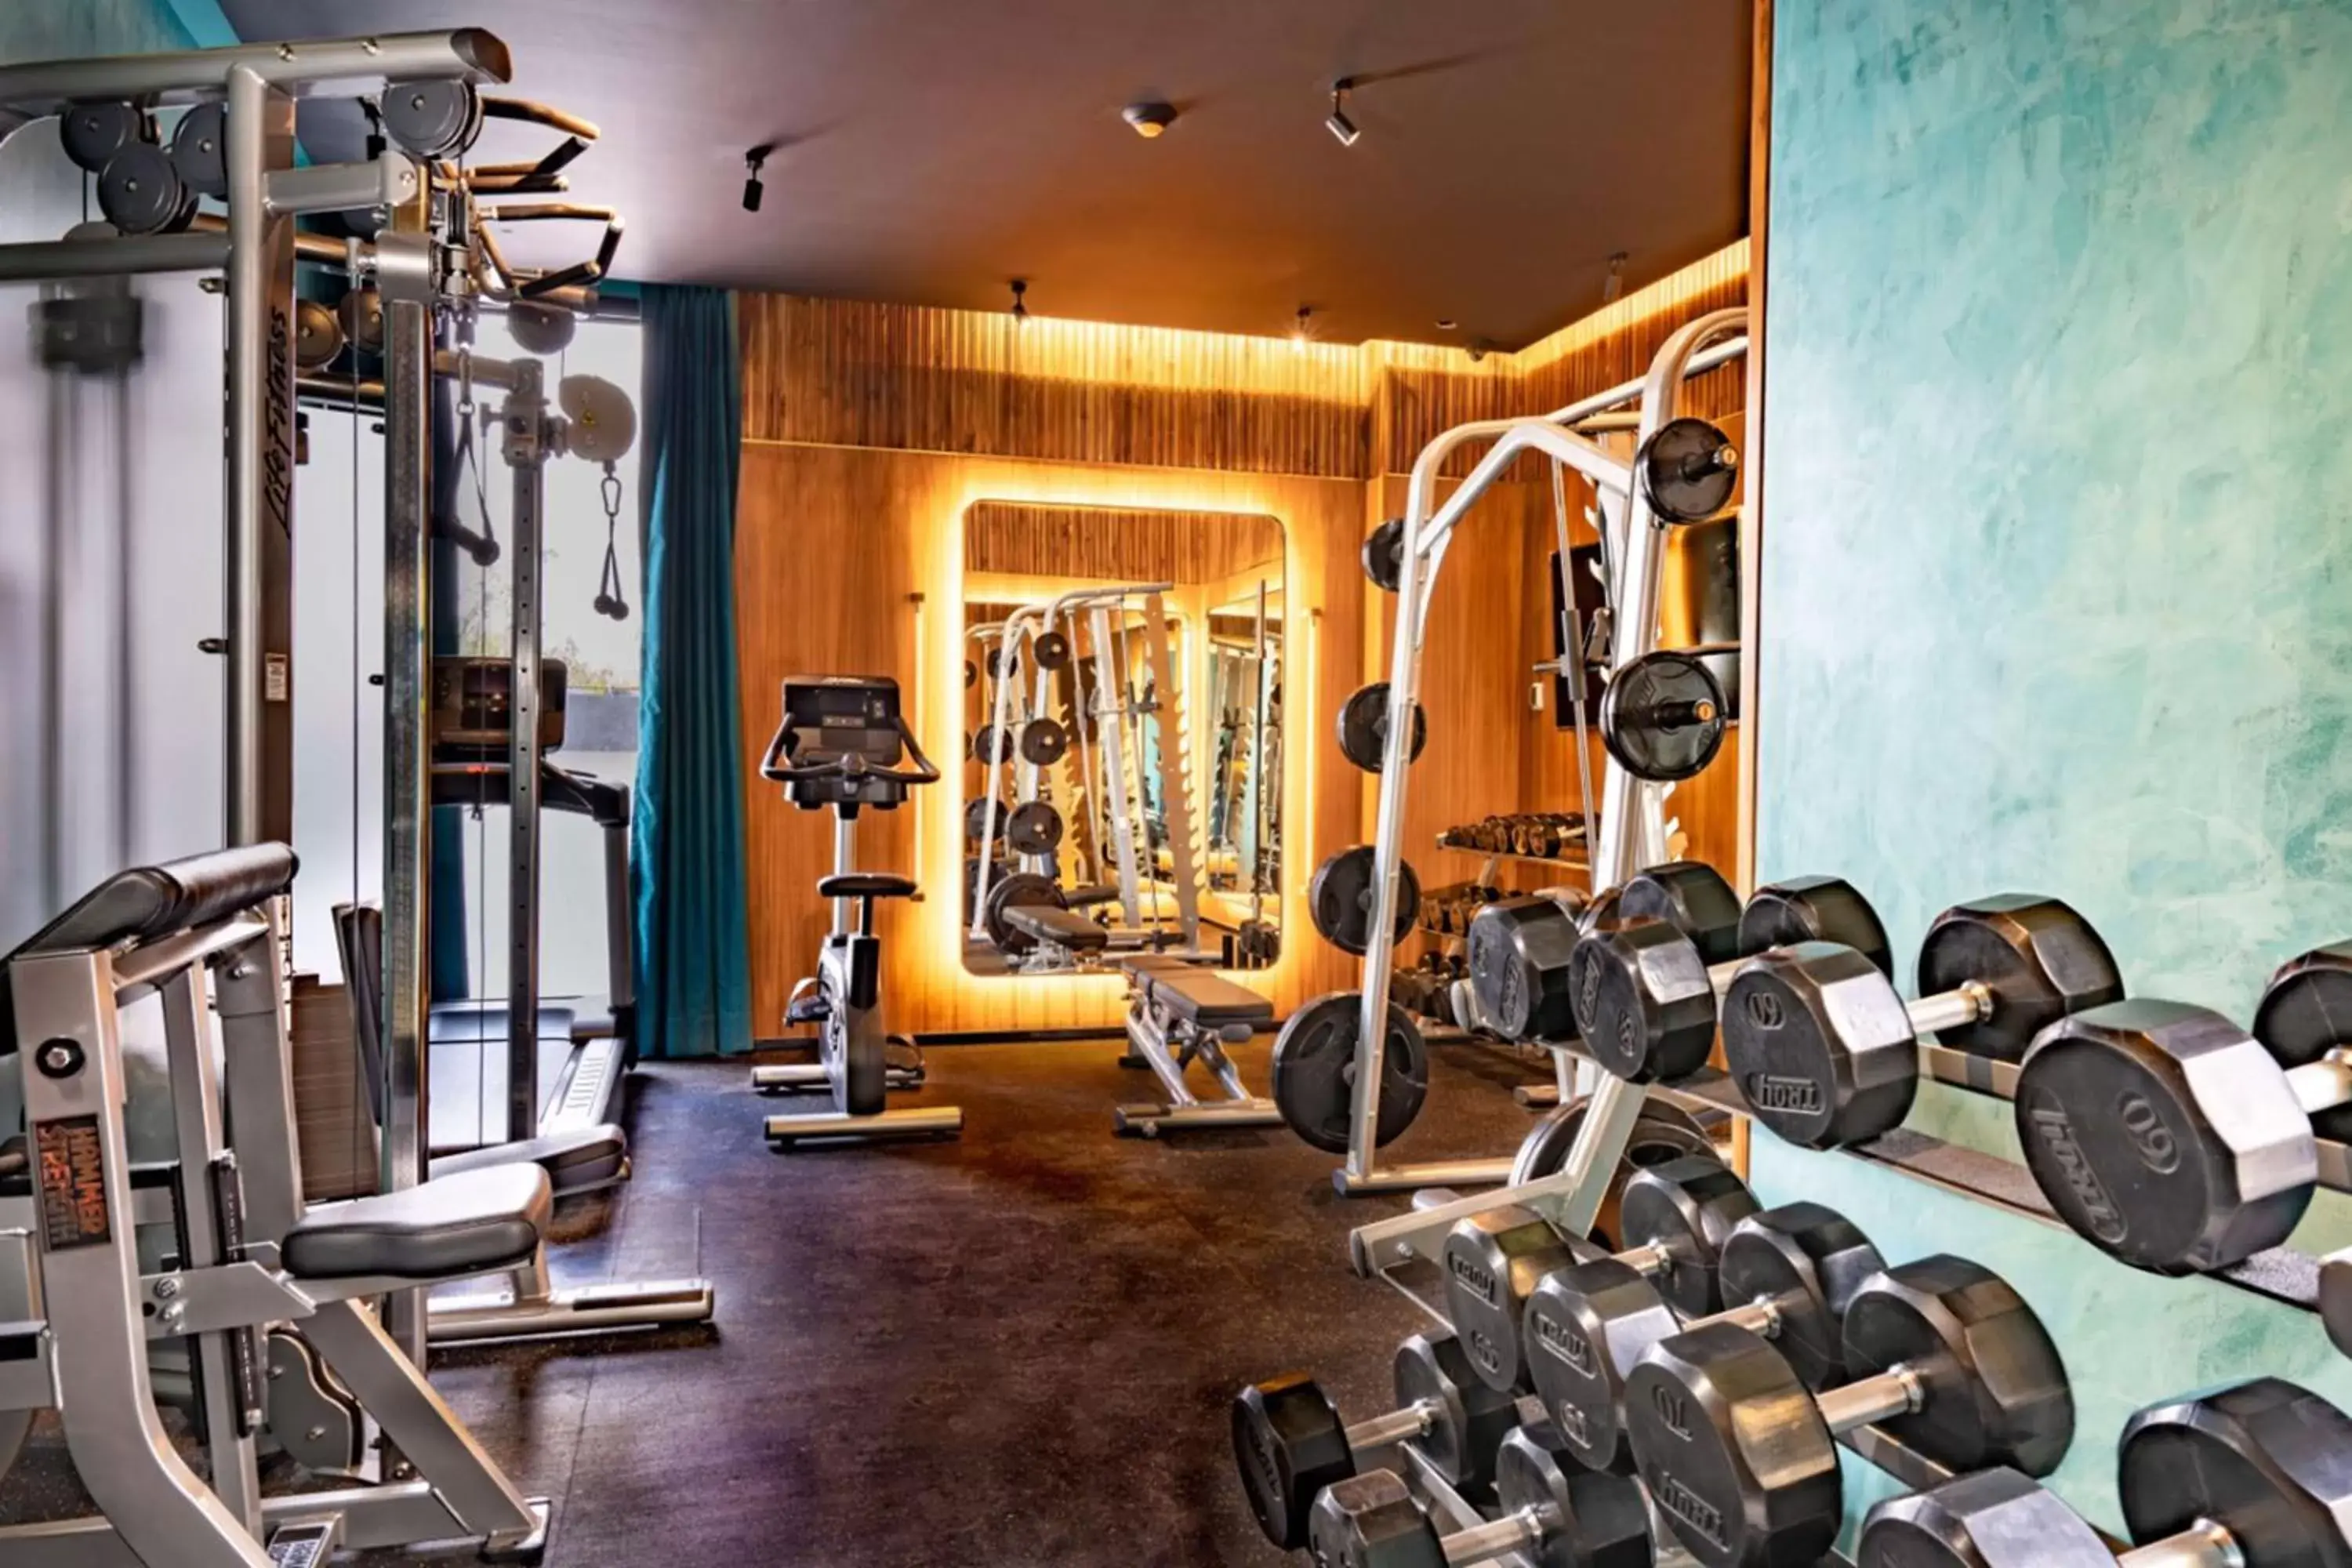 Fitness centre/facilities, Fitness Center/Facilities in Umbral, Curio Collection By Hilton